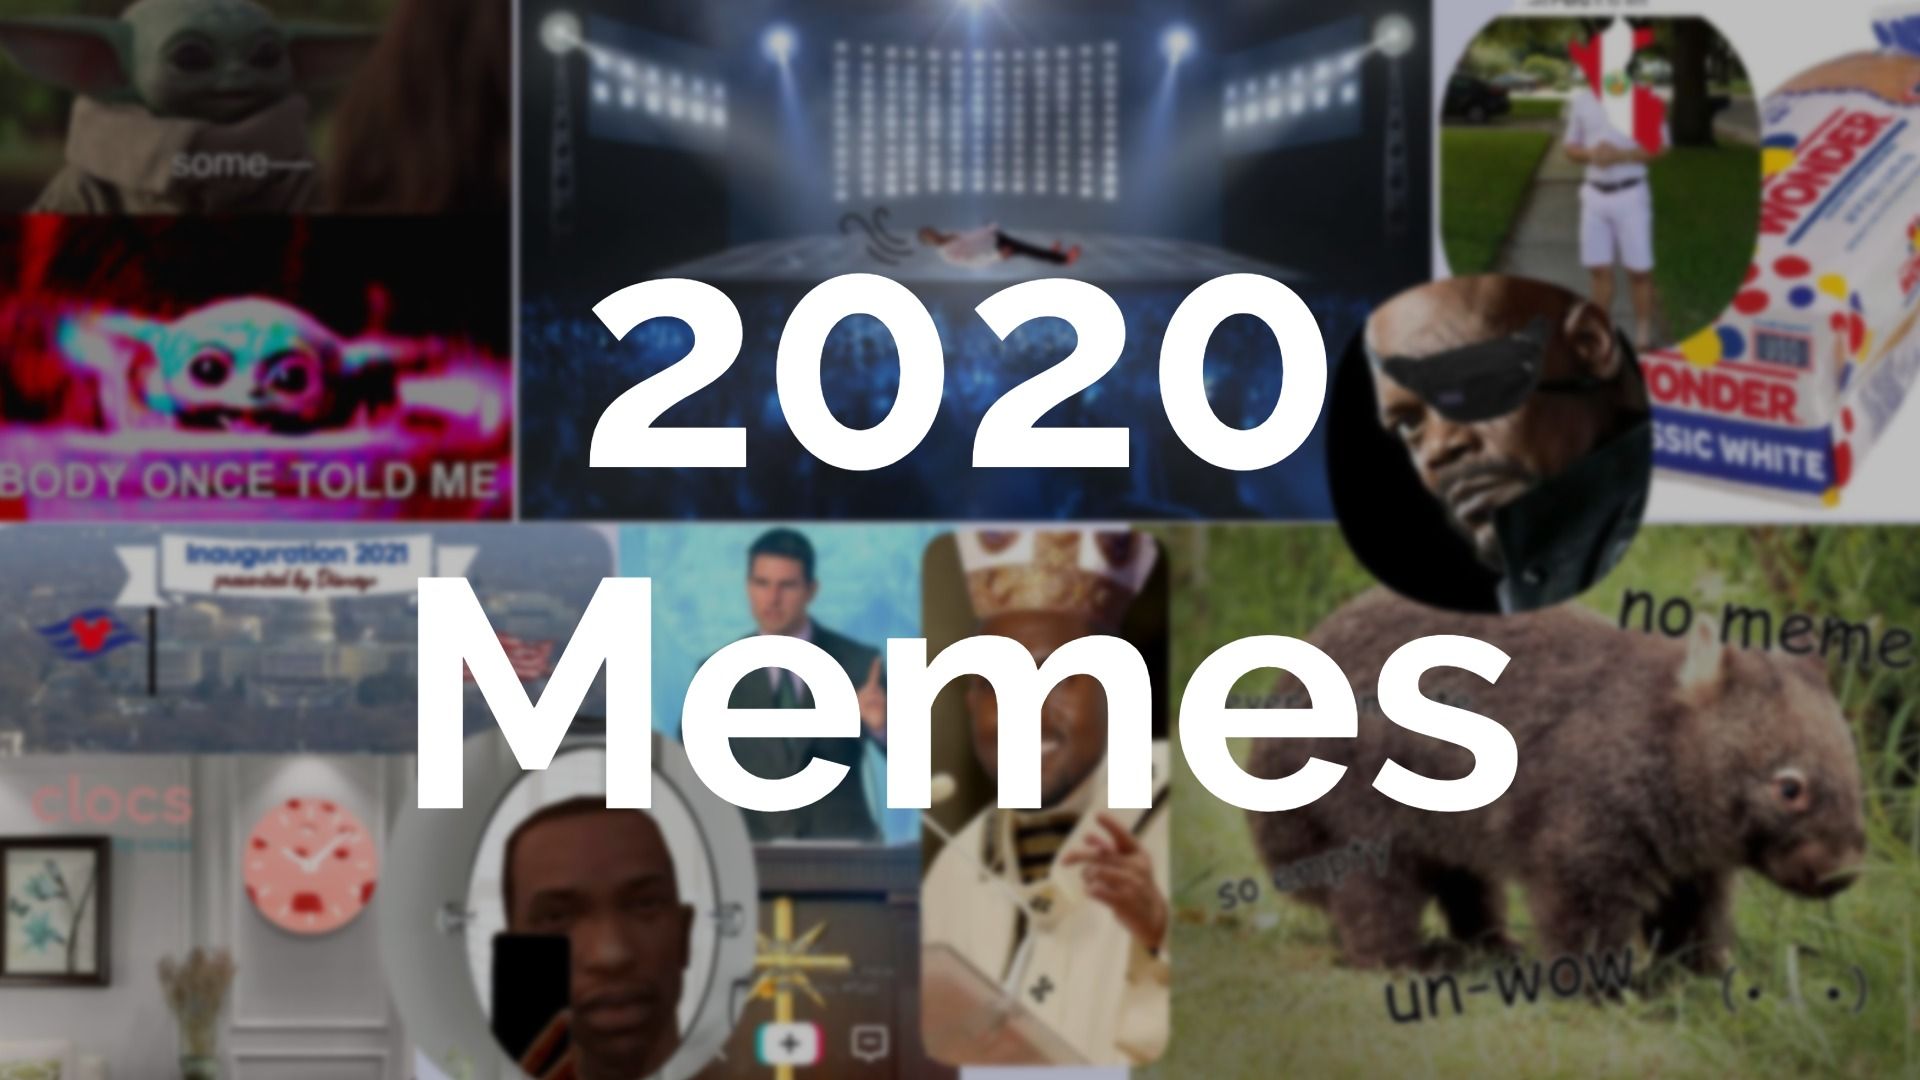 20 Memes We're Looking Forward to in 2020 (with Templates)